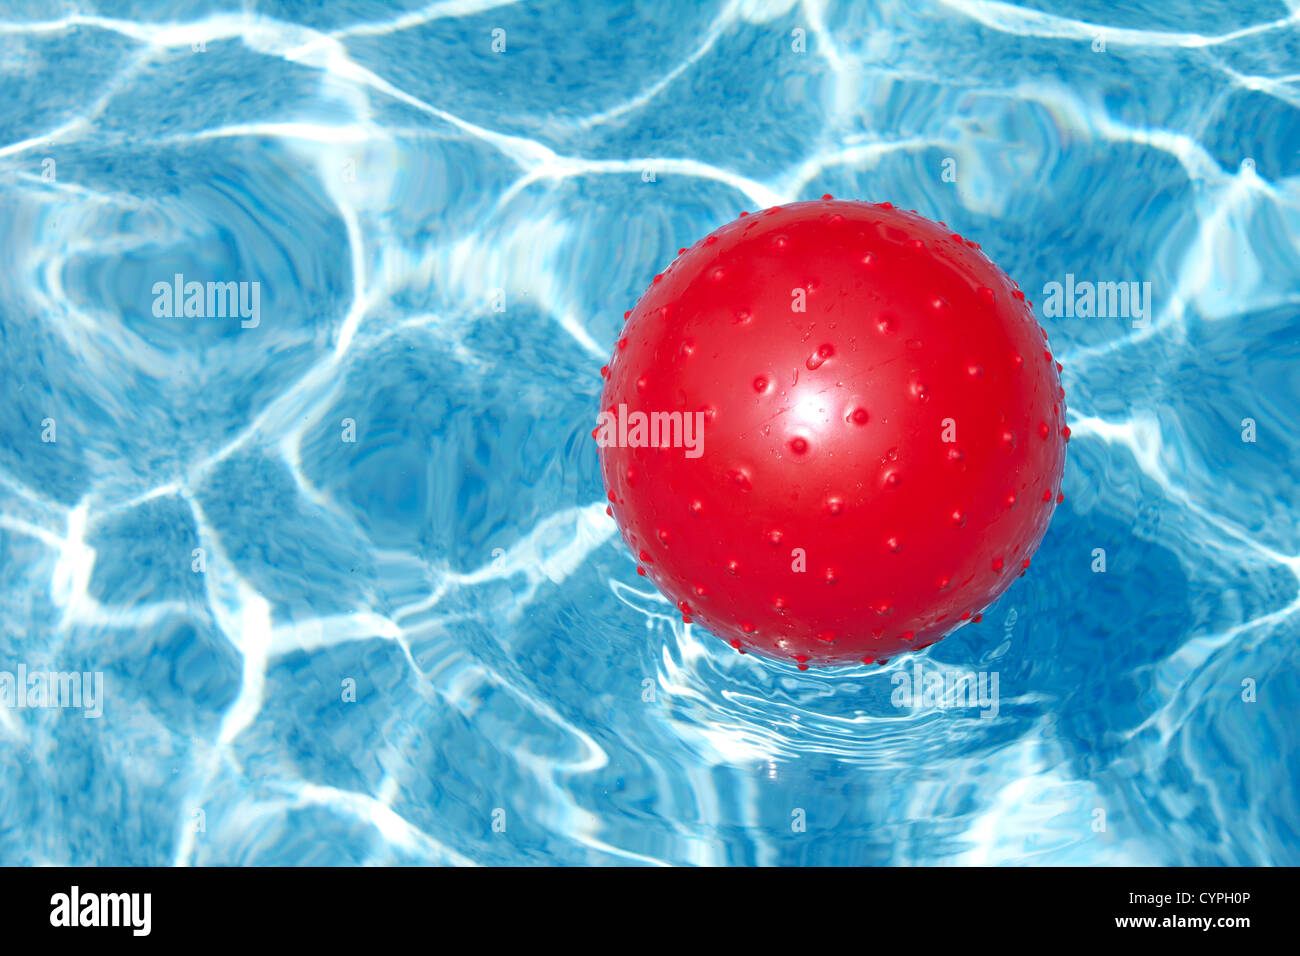 Red Ball floating in Pool Stockfoto